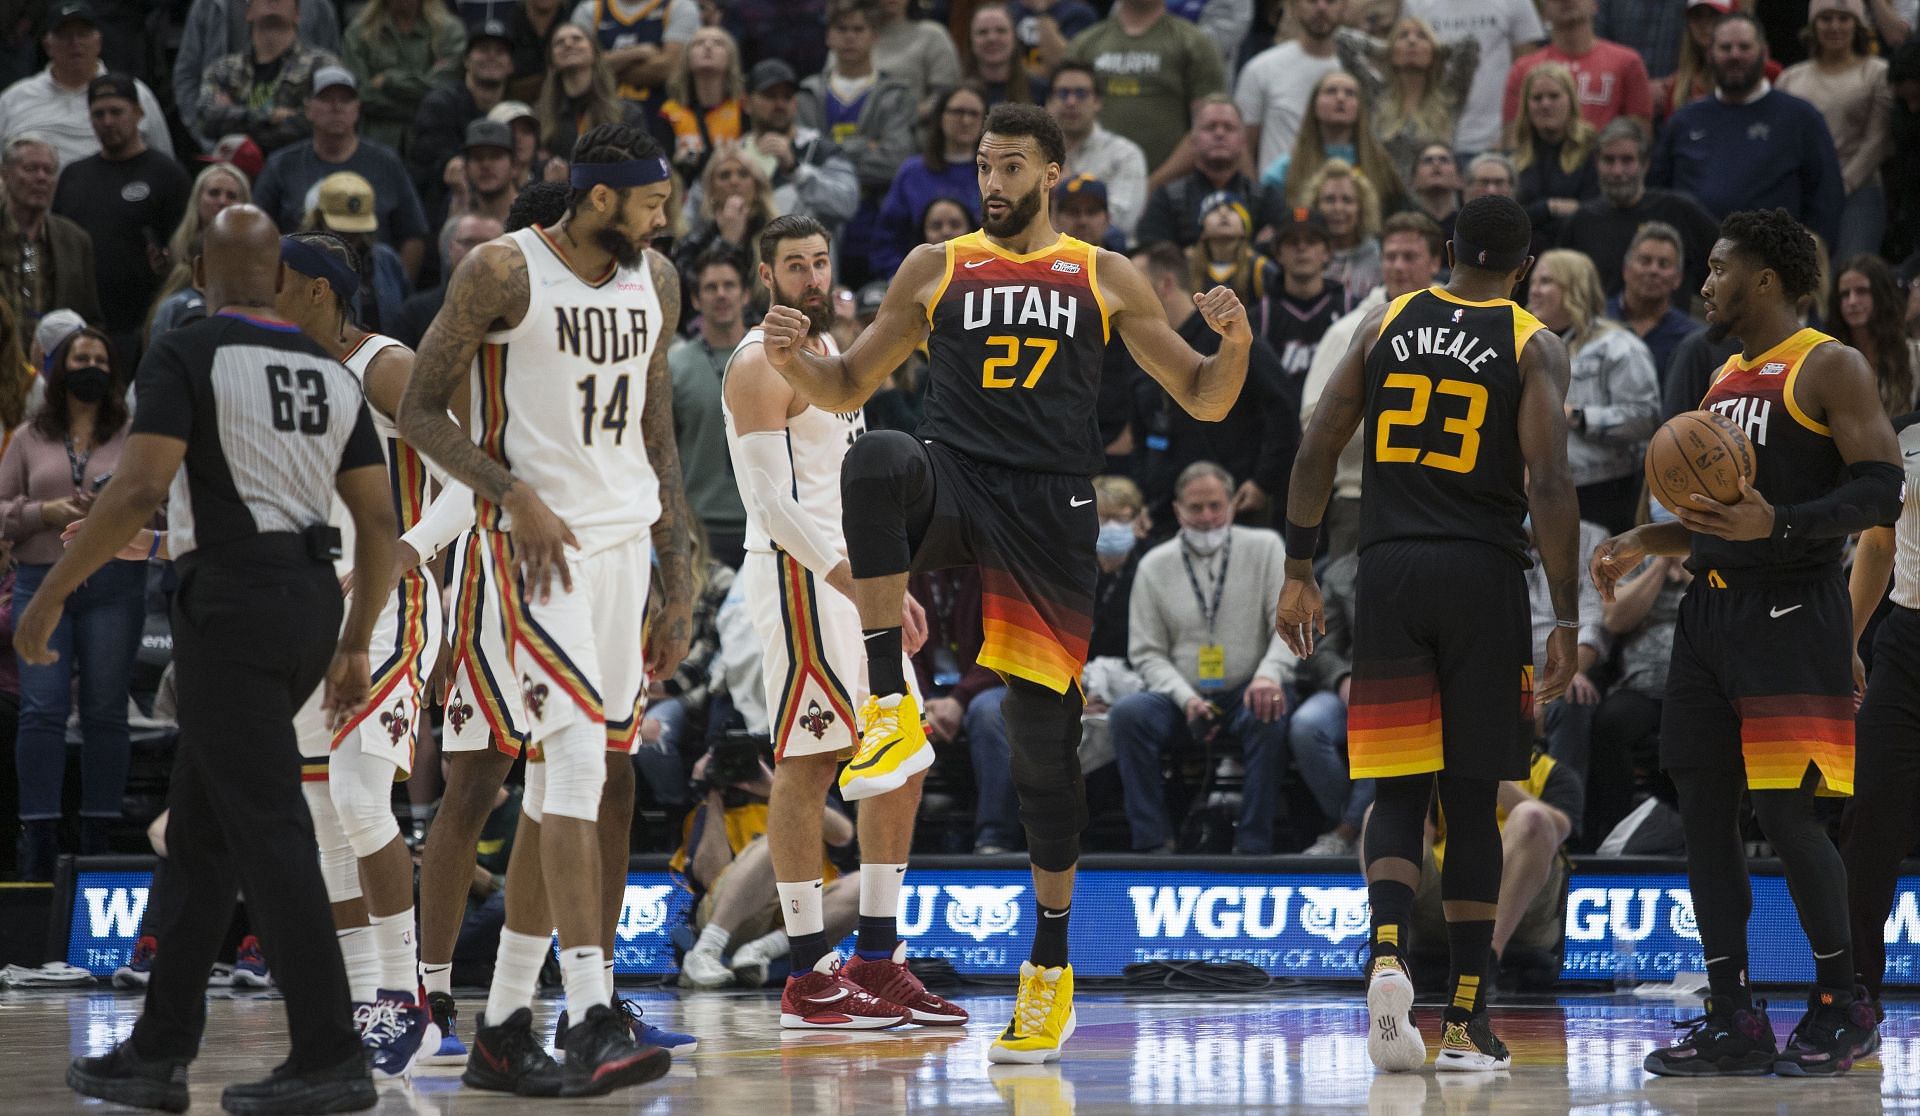 Utah Jazz players react during their game against the New Orleans Pelicans.